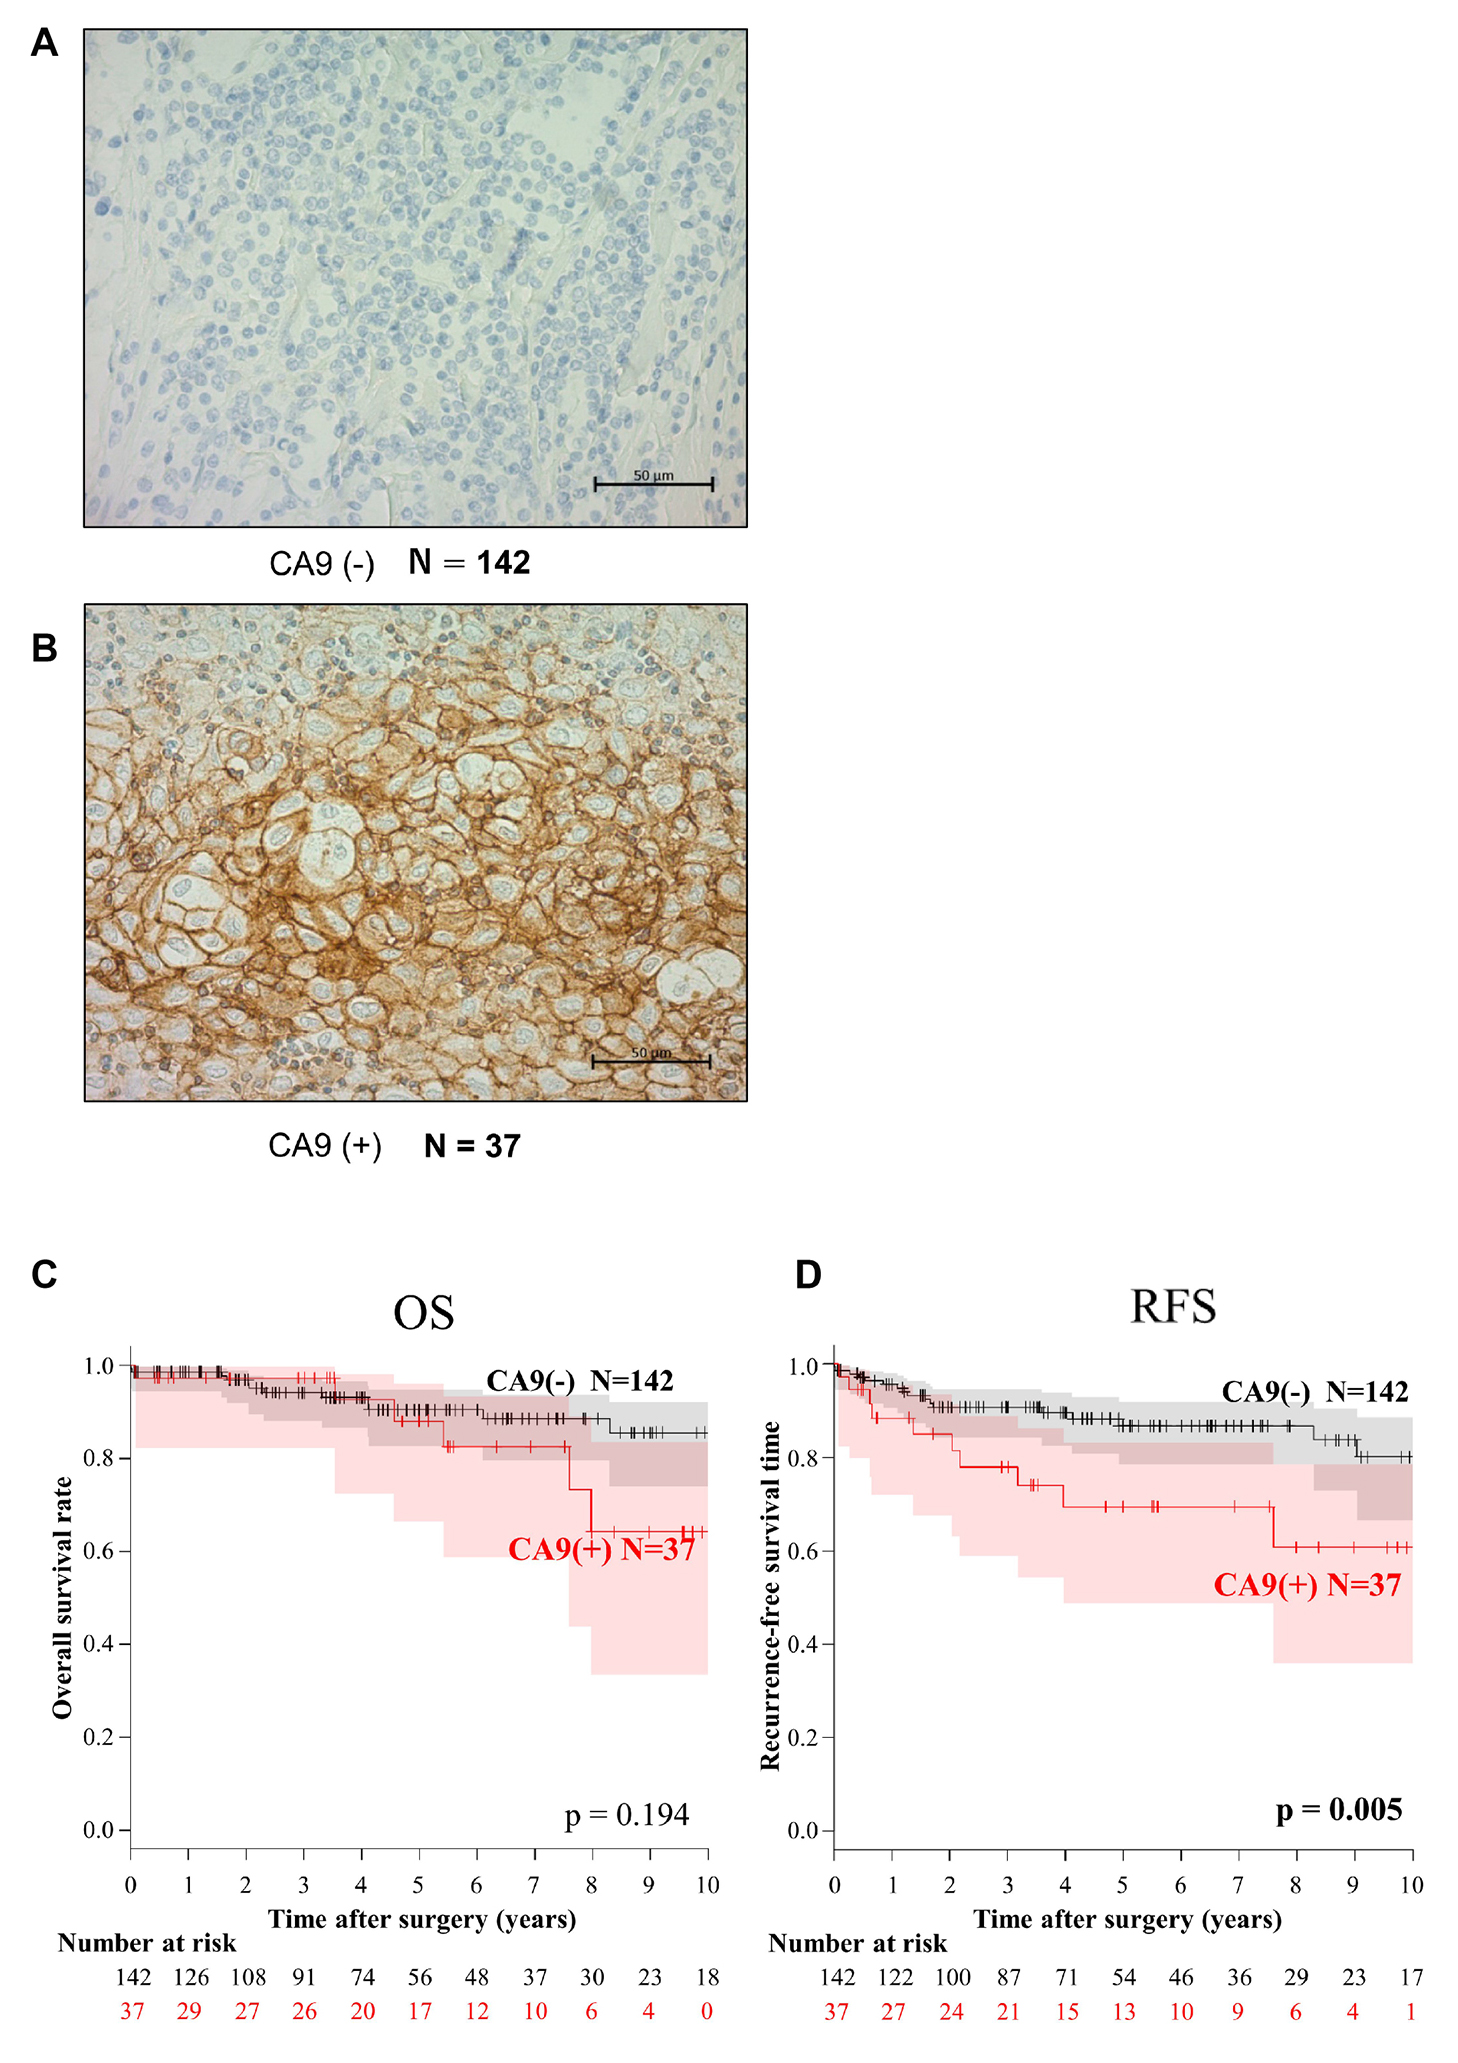 Immunohistochemical analysis of CA9 expression and the association of CA9 expression with overall survival (OS) and recurrence-free survival (RFS) of patients with thymic epithelial tumors.